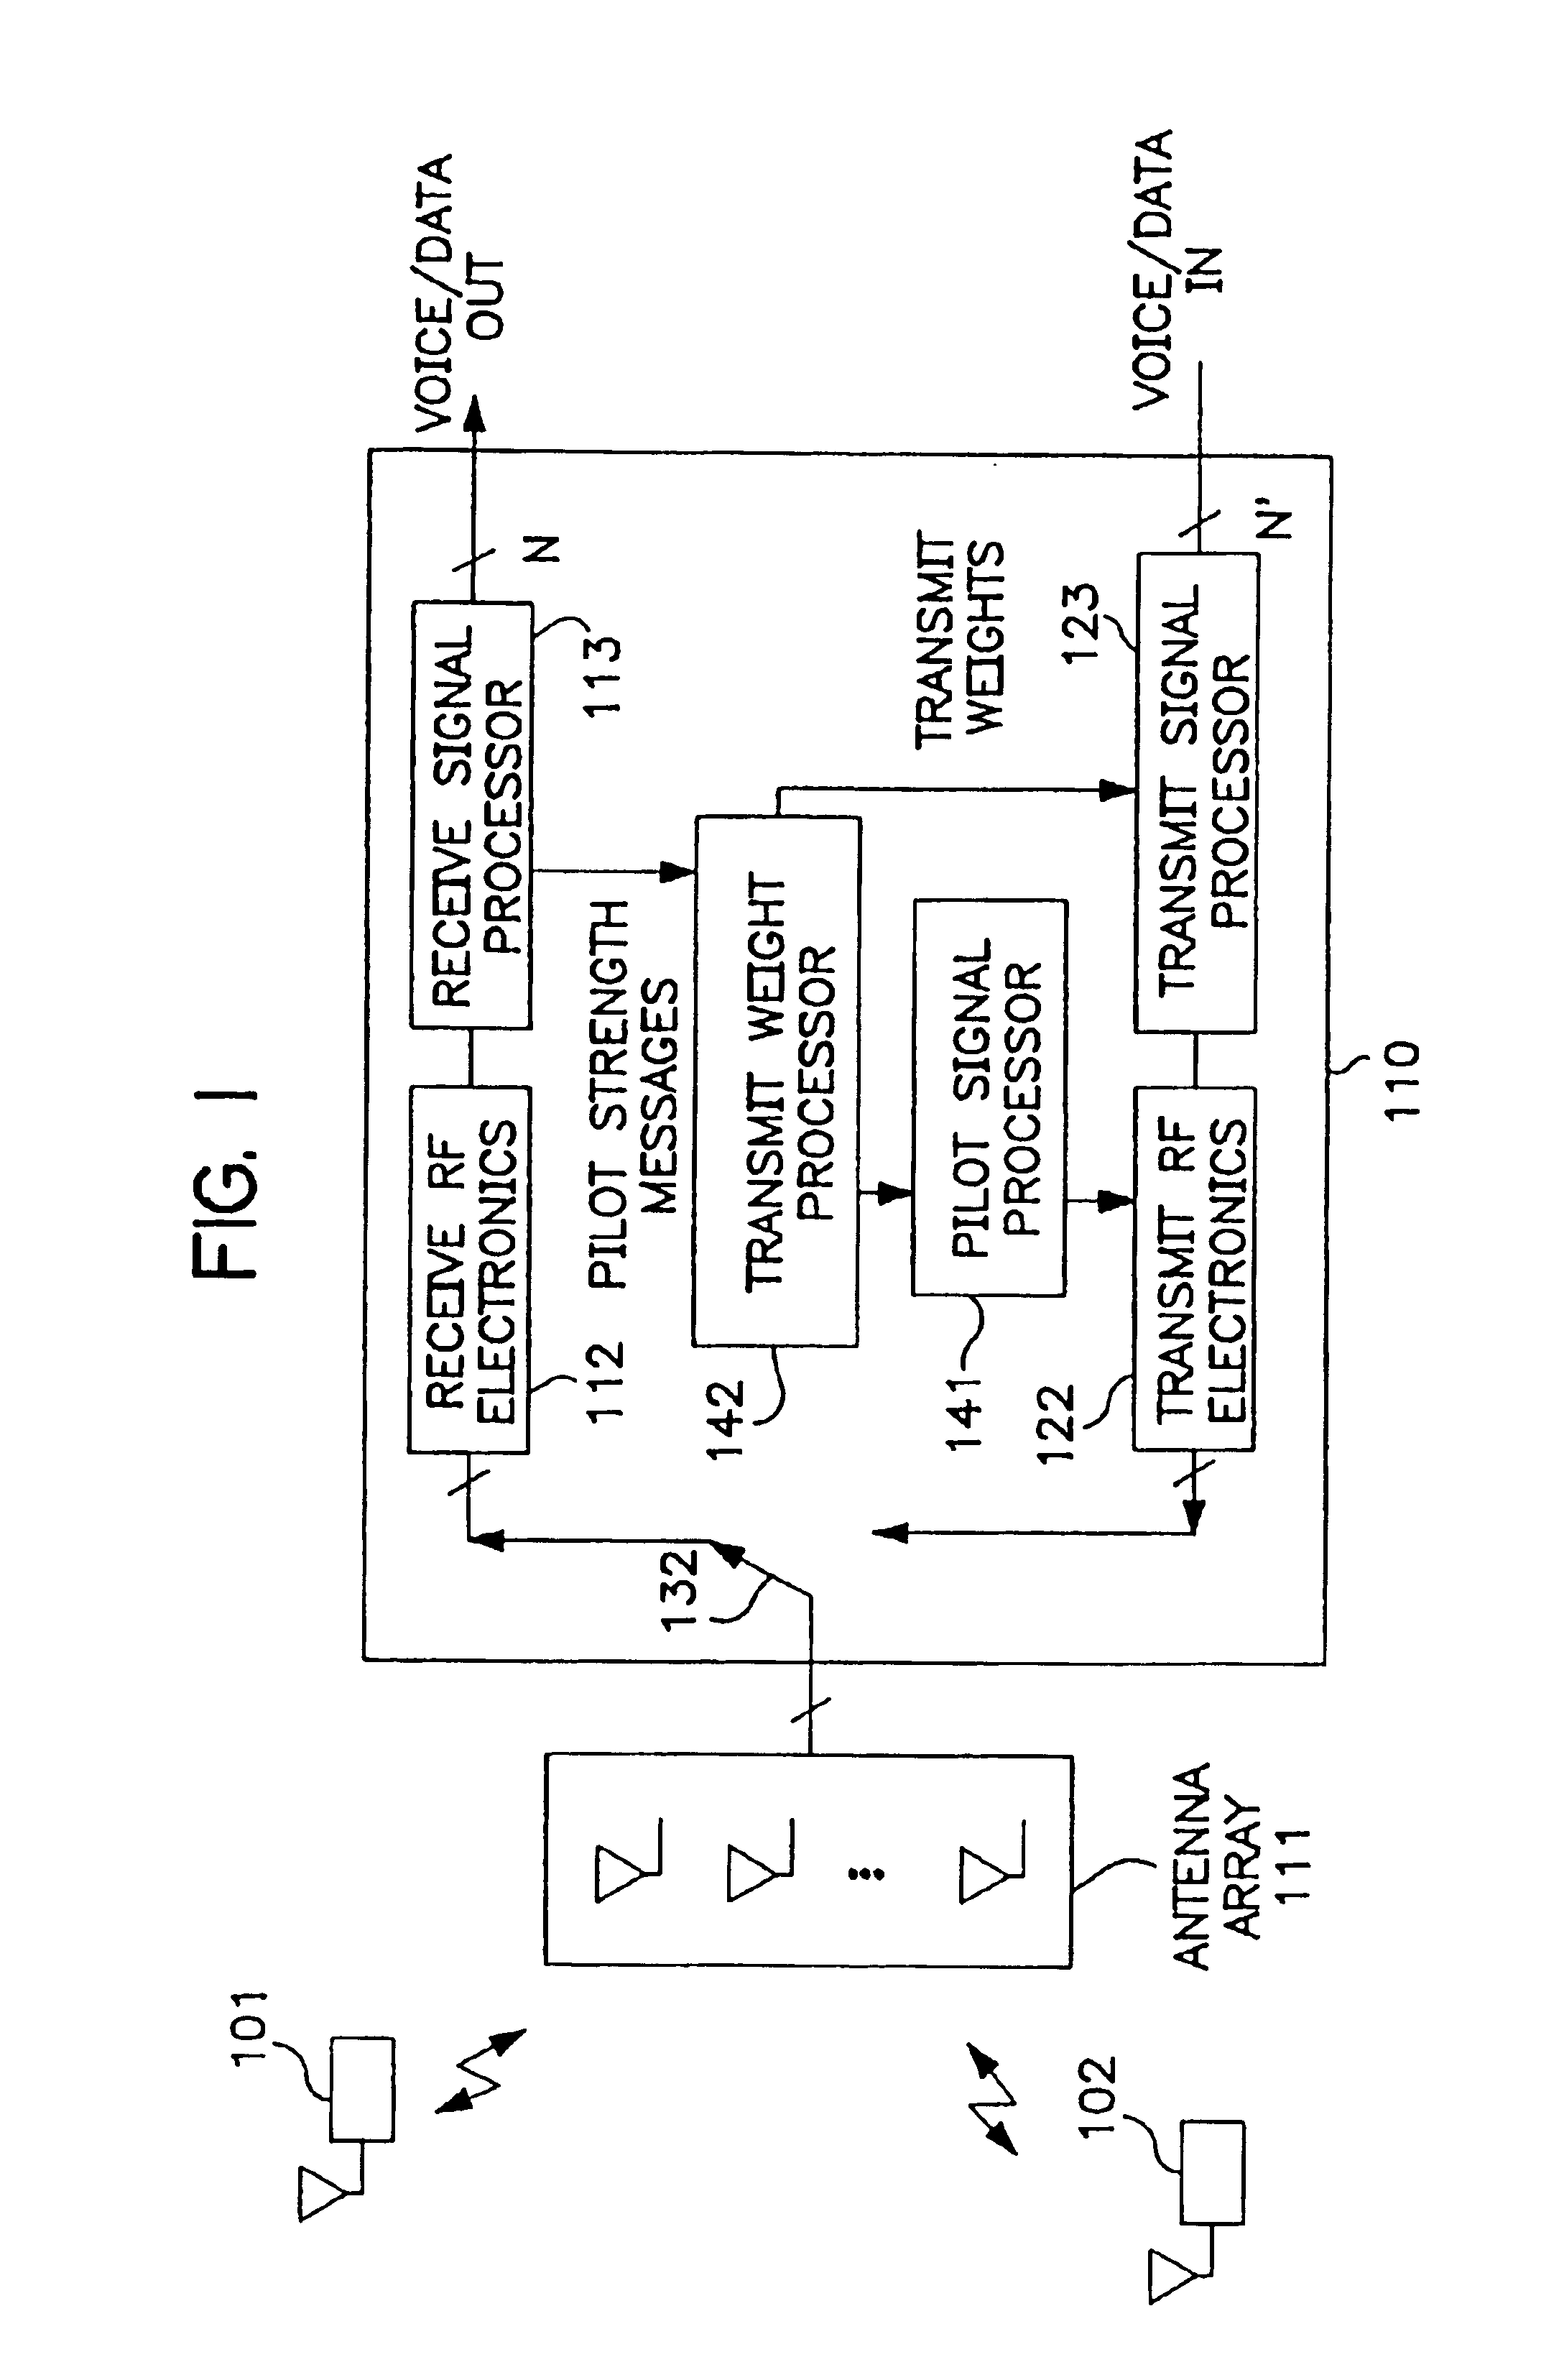 Downlink signal processing in CDMA systems utilizing arrays of antennae